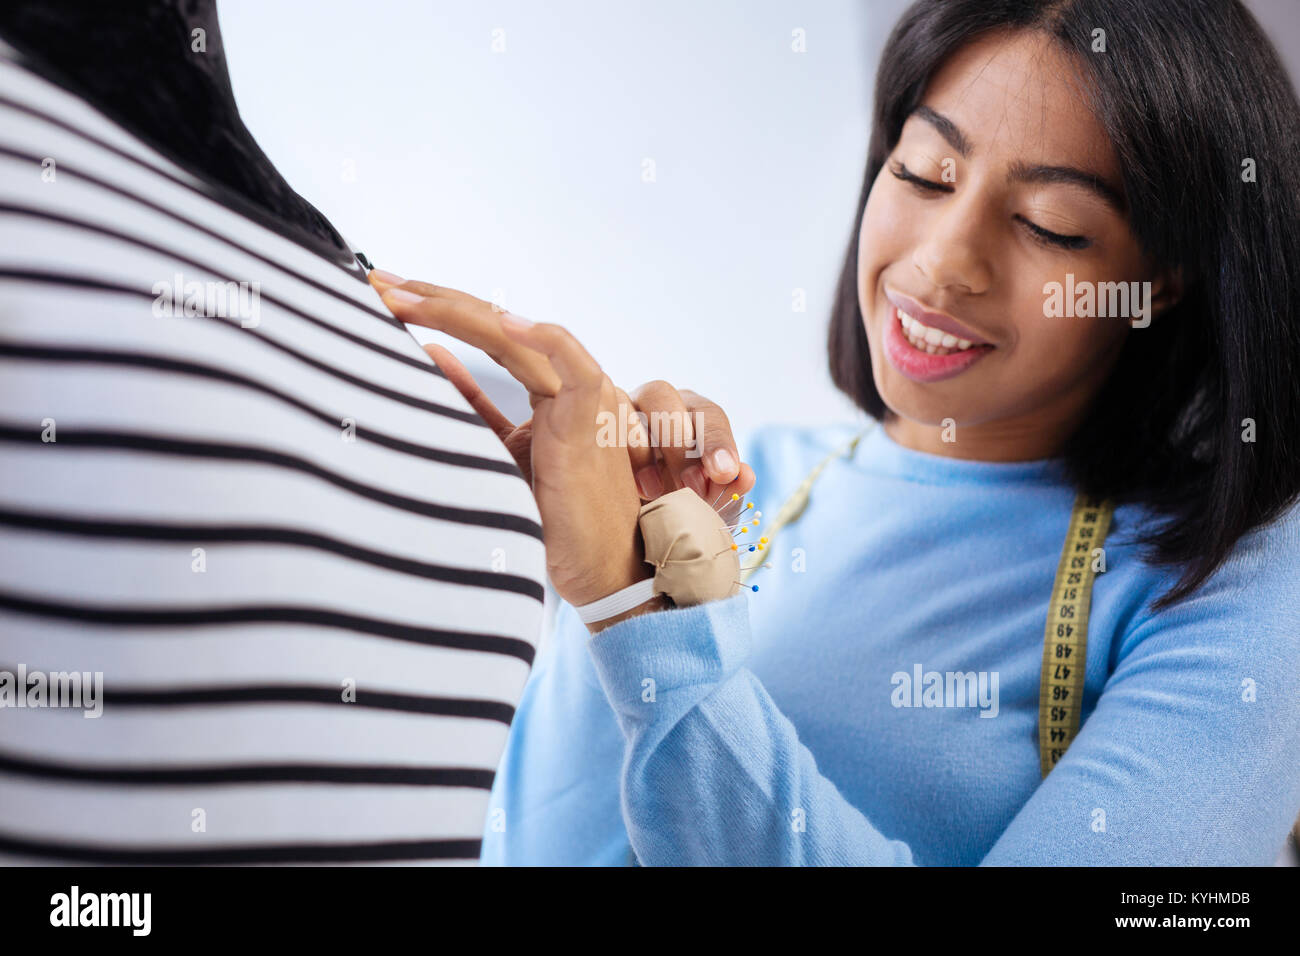 Smiling woman taking a little pin for a blouse while working Stock Photo